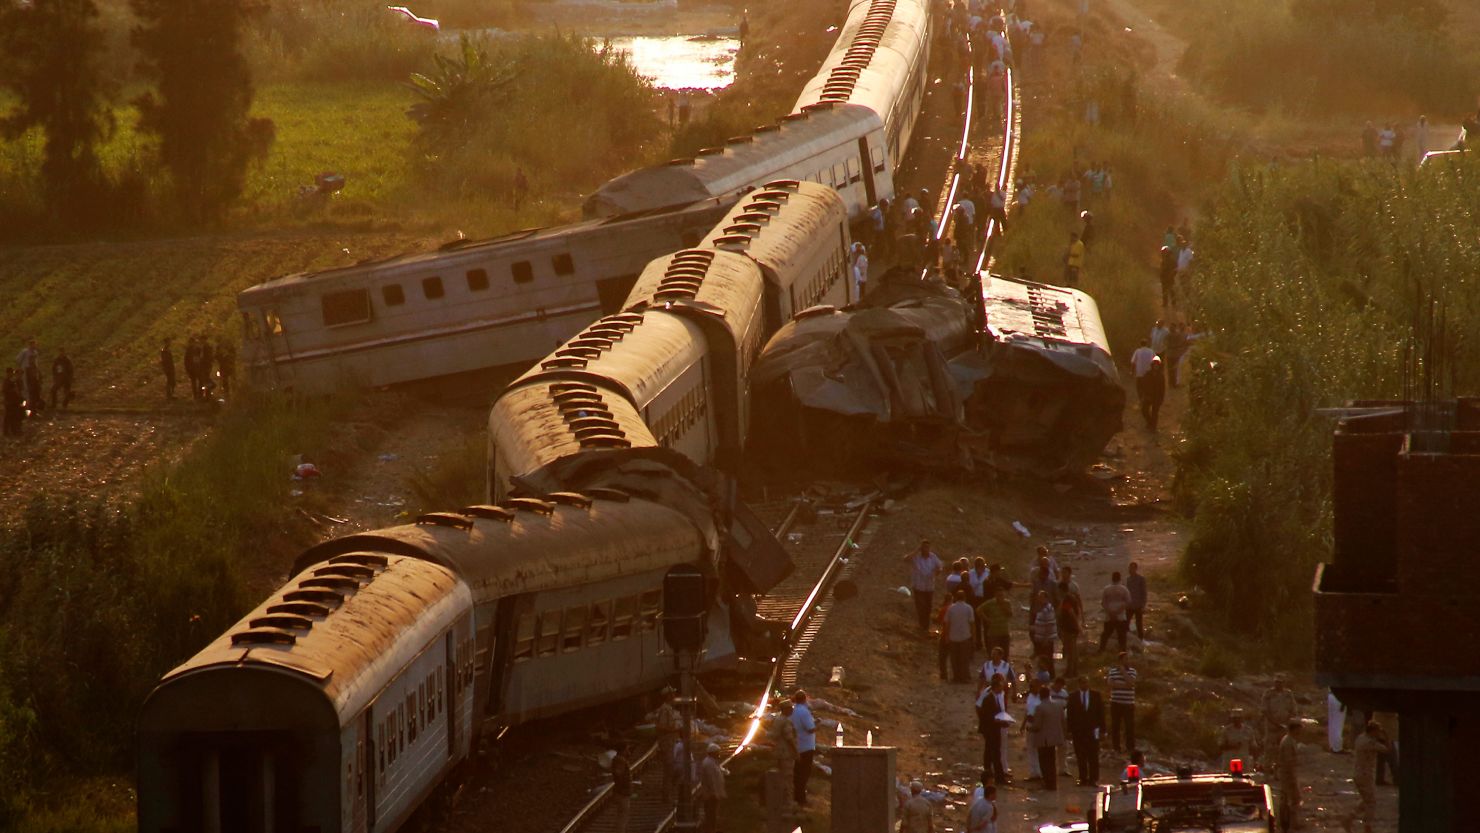 The collision involved one train traveling from Cairo and another from Port Said.